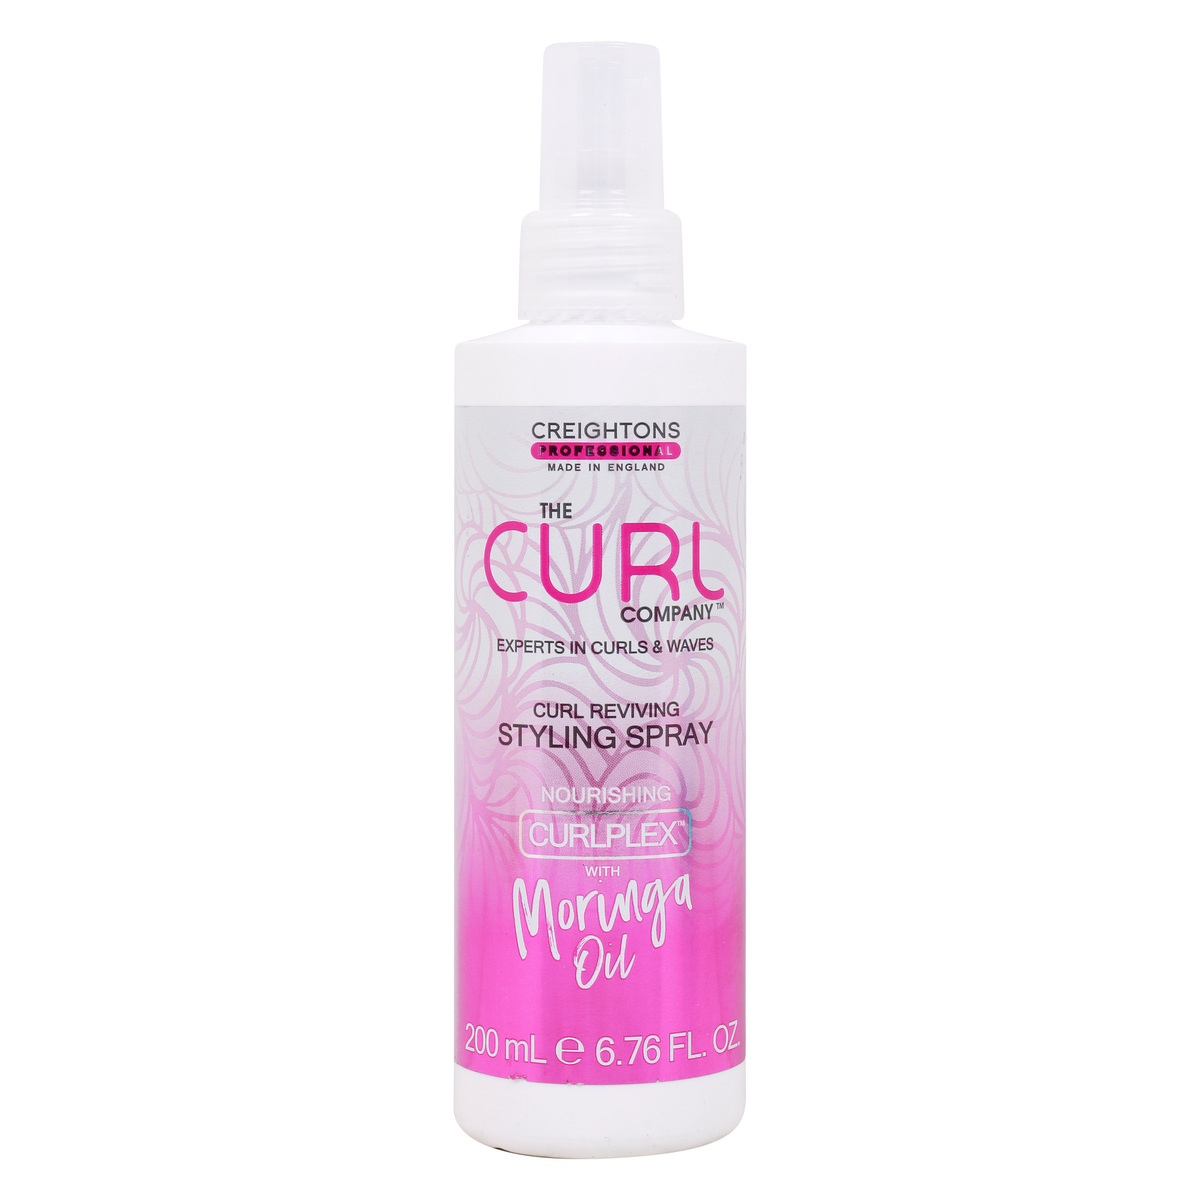 Creightons The Curl Company Curl Reviving Styling Spray, 200 ml